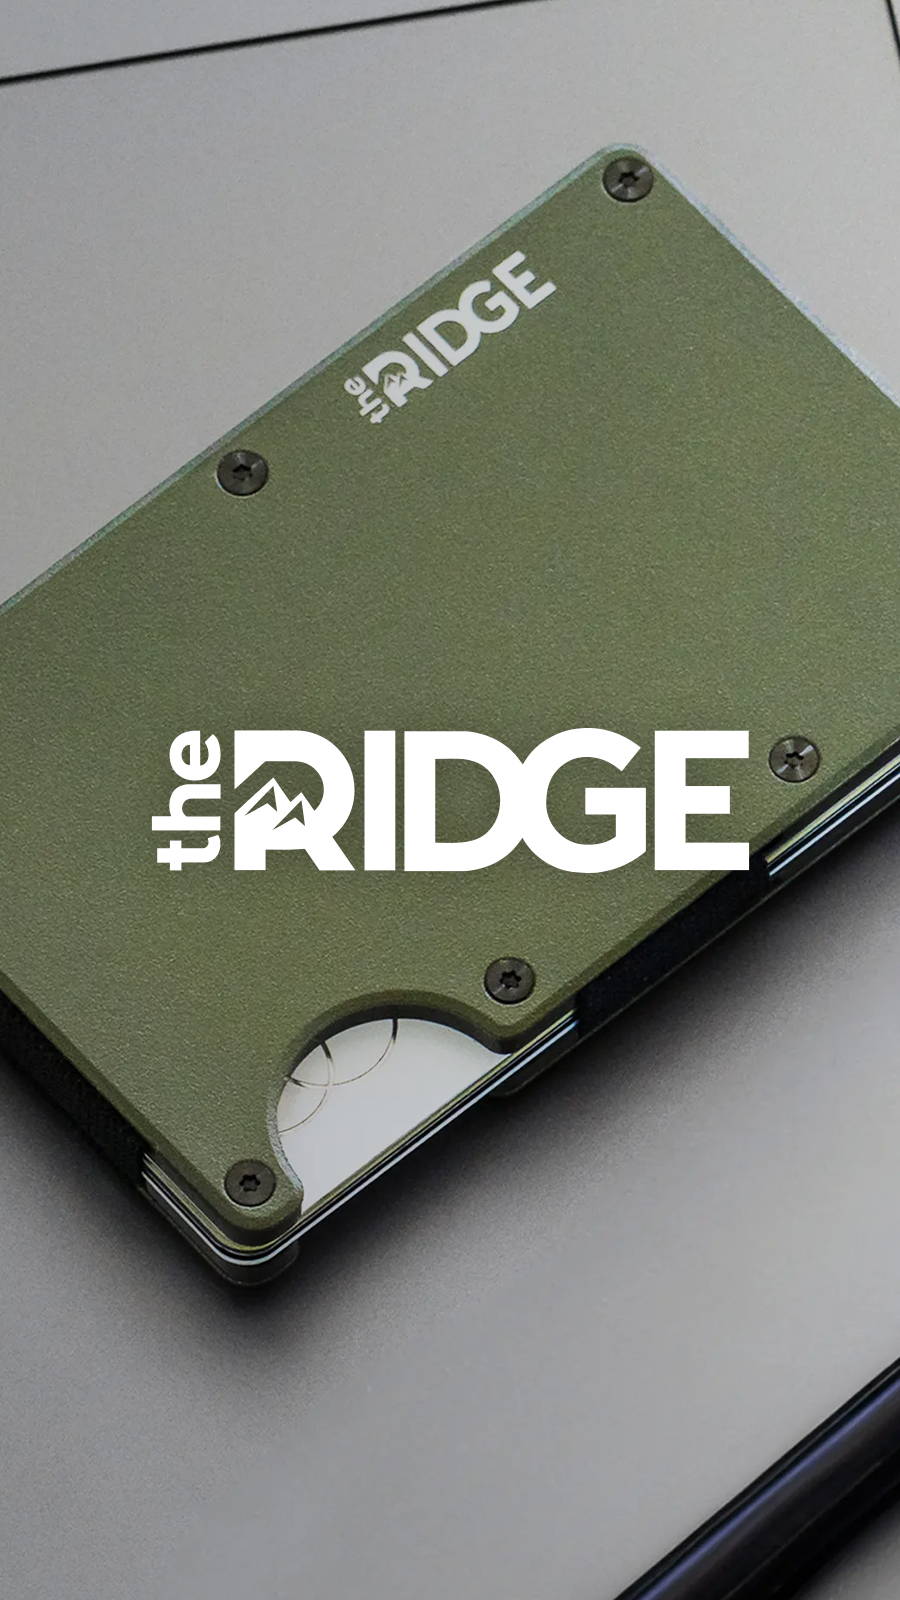 The Ridge Wallet in green laying on metal table